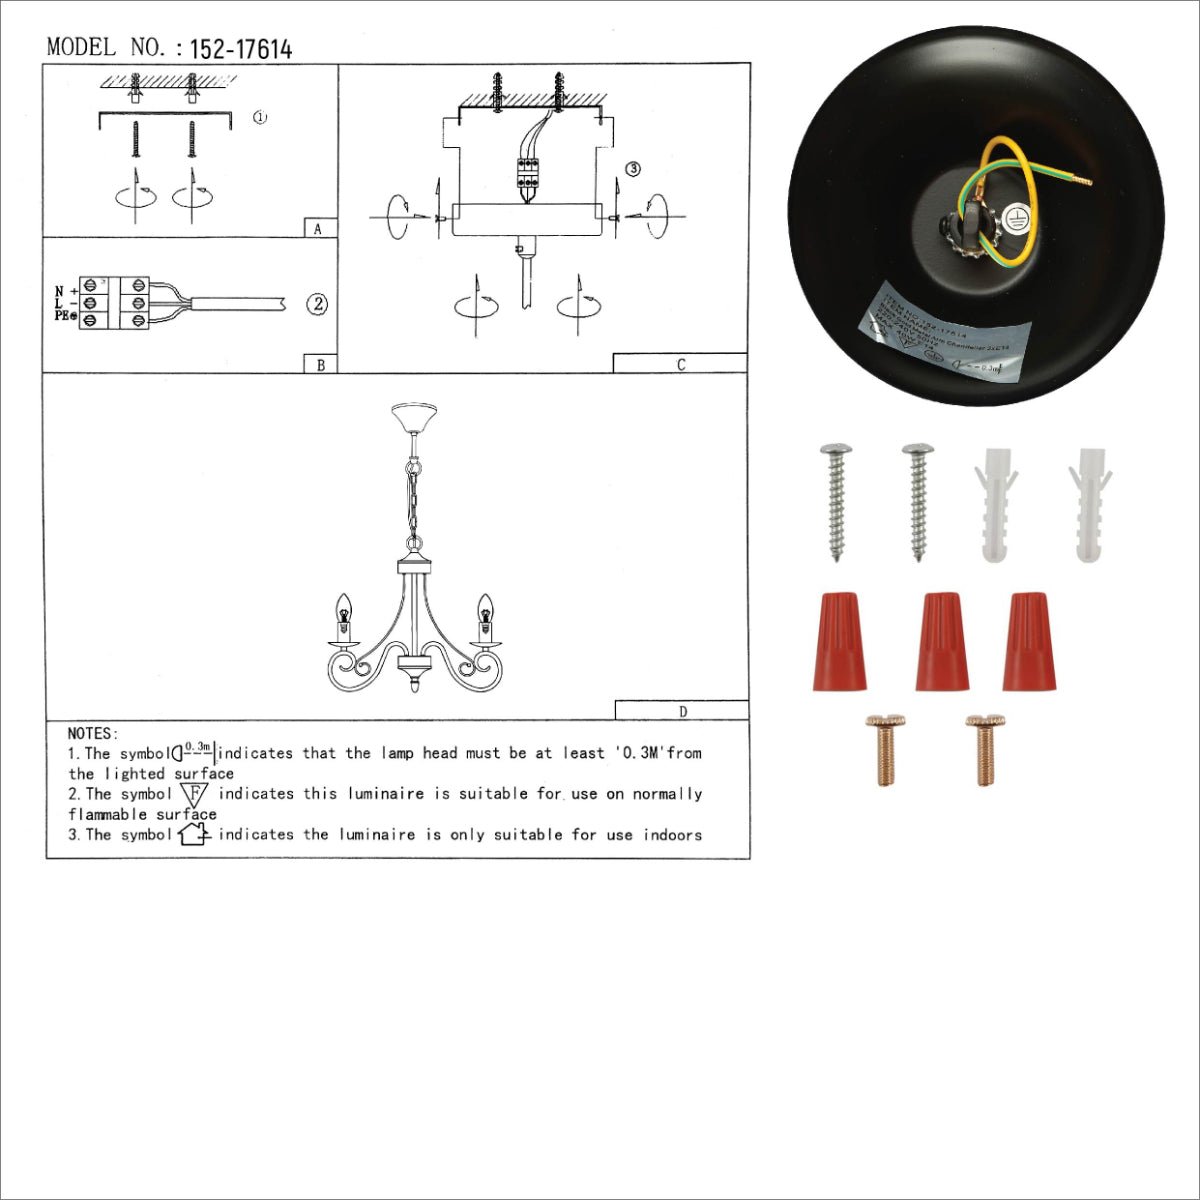 User manual for Candle Vintage Gold Patinated Black French Chandelier Ceiling Light 3xE14 | TEKLED 152-17614